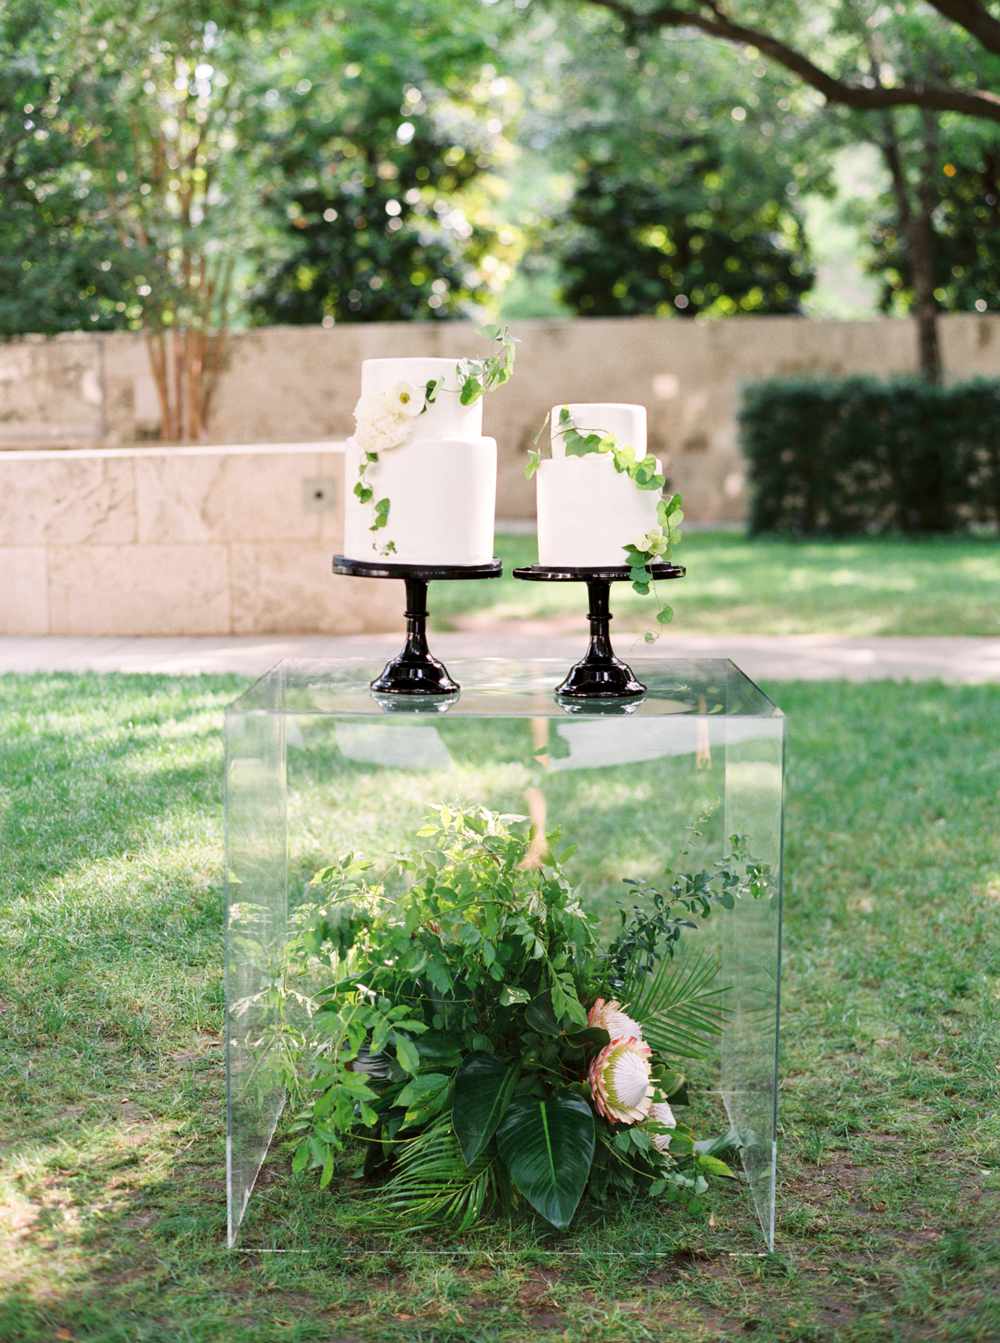 lucite table containing a floral arrangement displaying two white wedding cakes